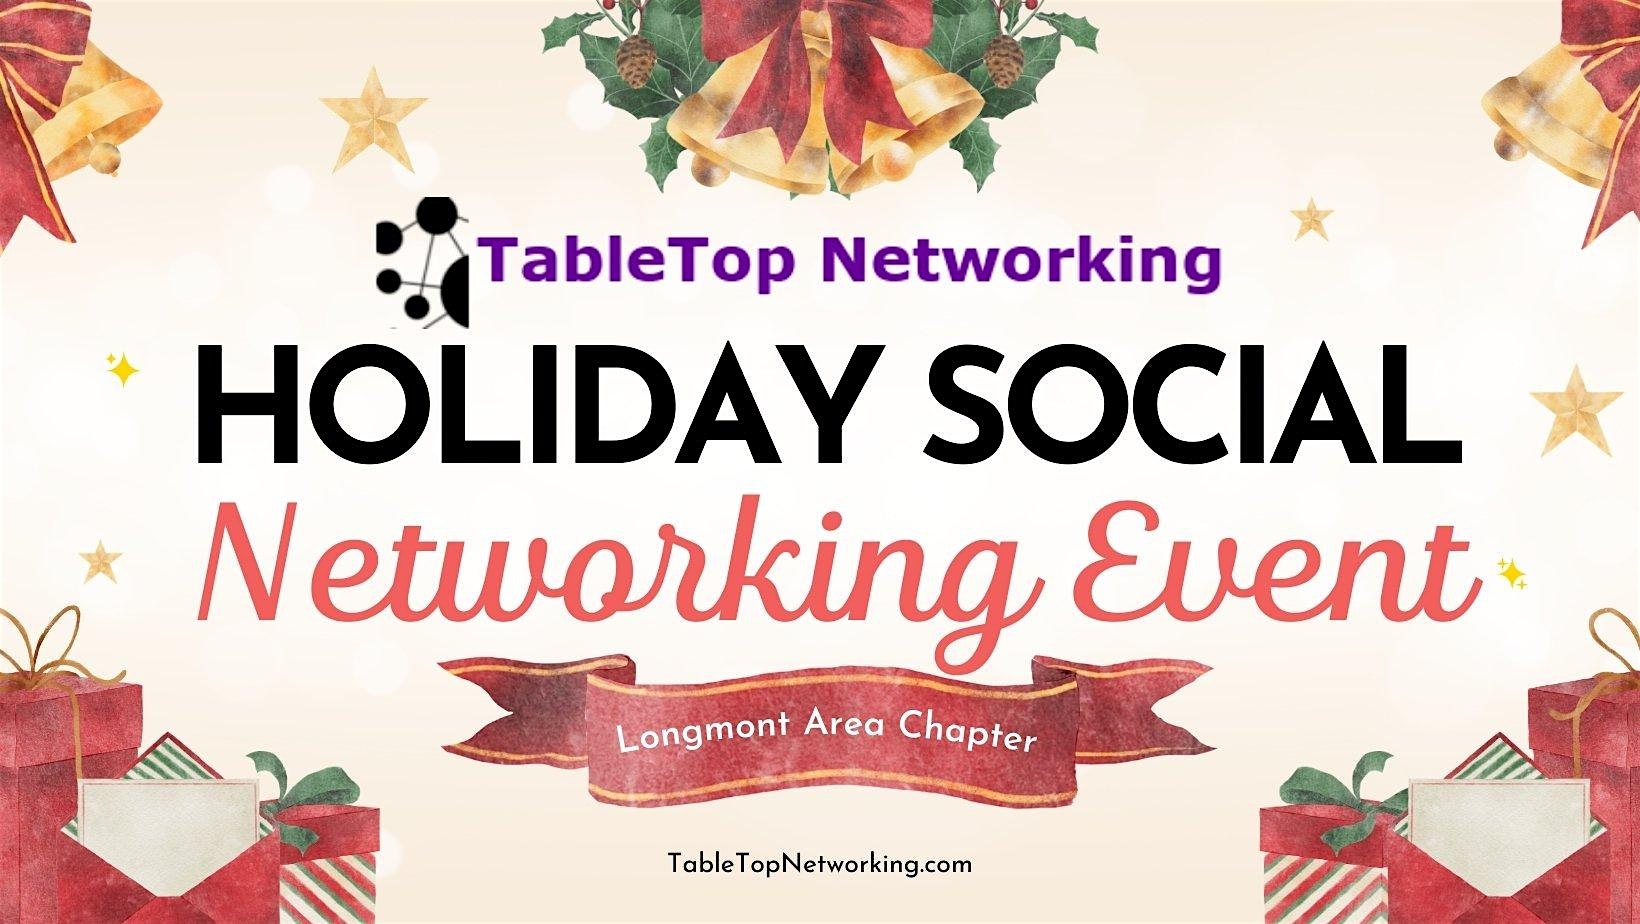 Longmont Area TableTop Networking Holiday Social